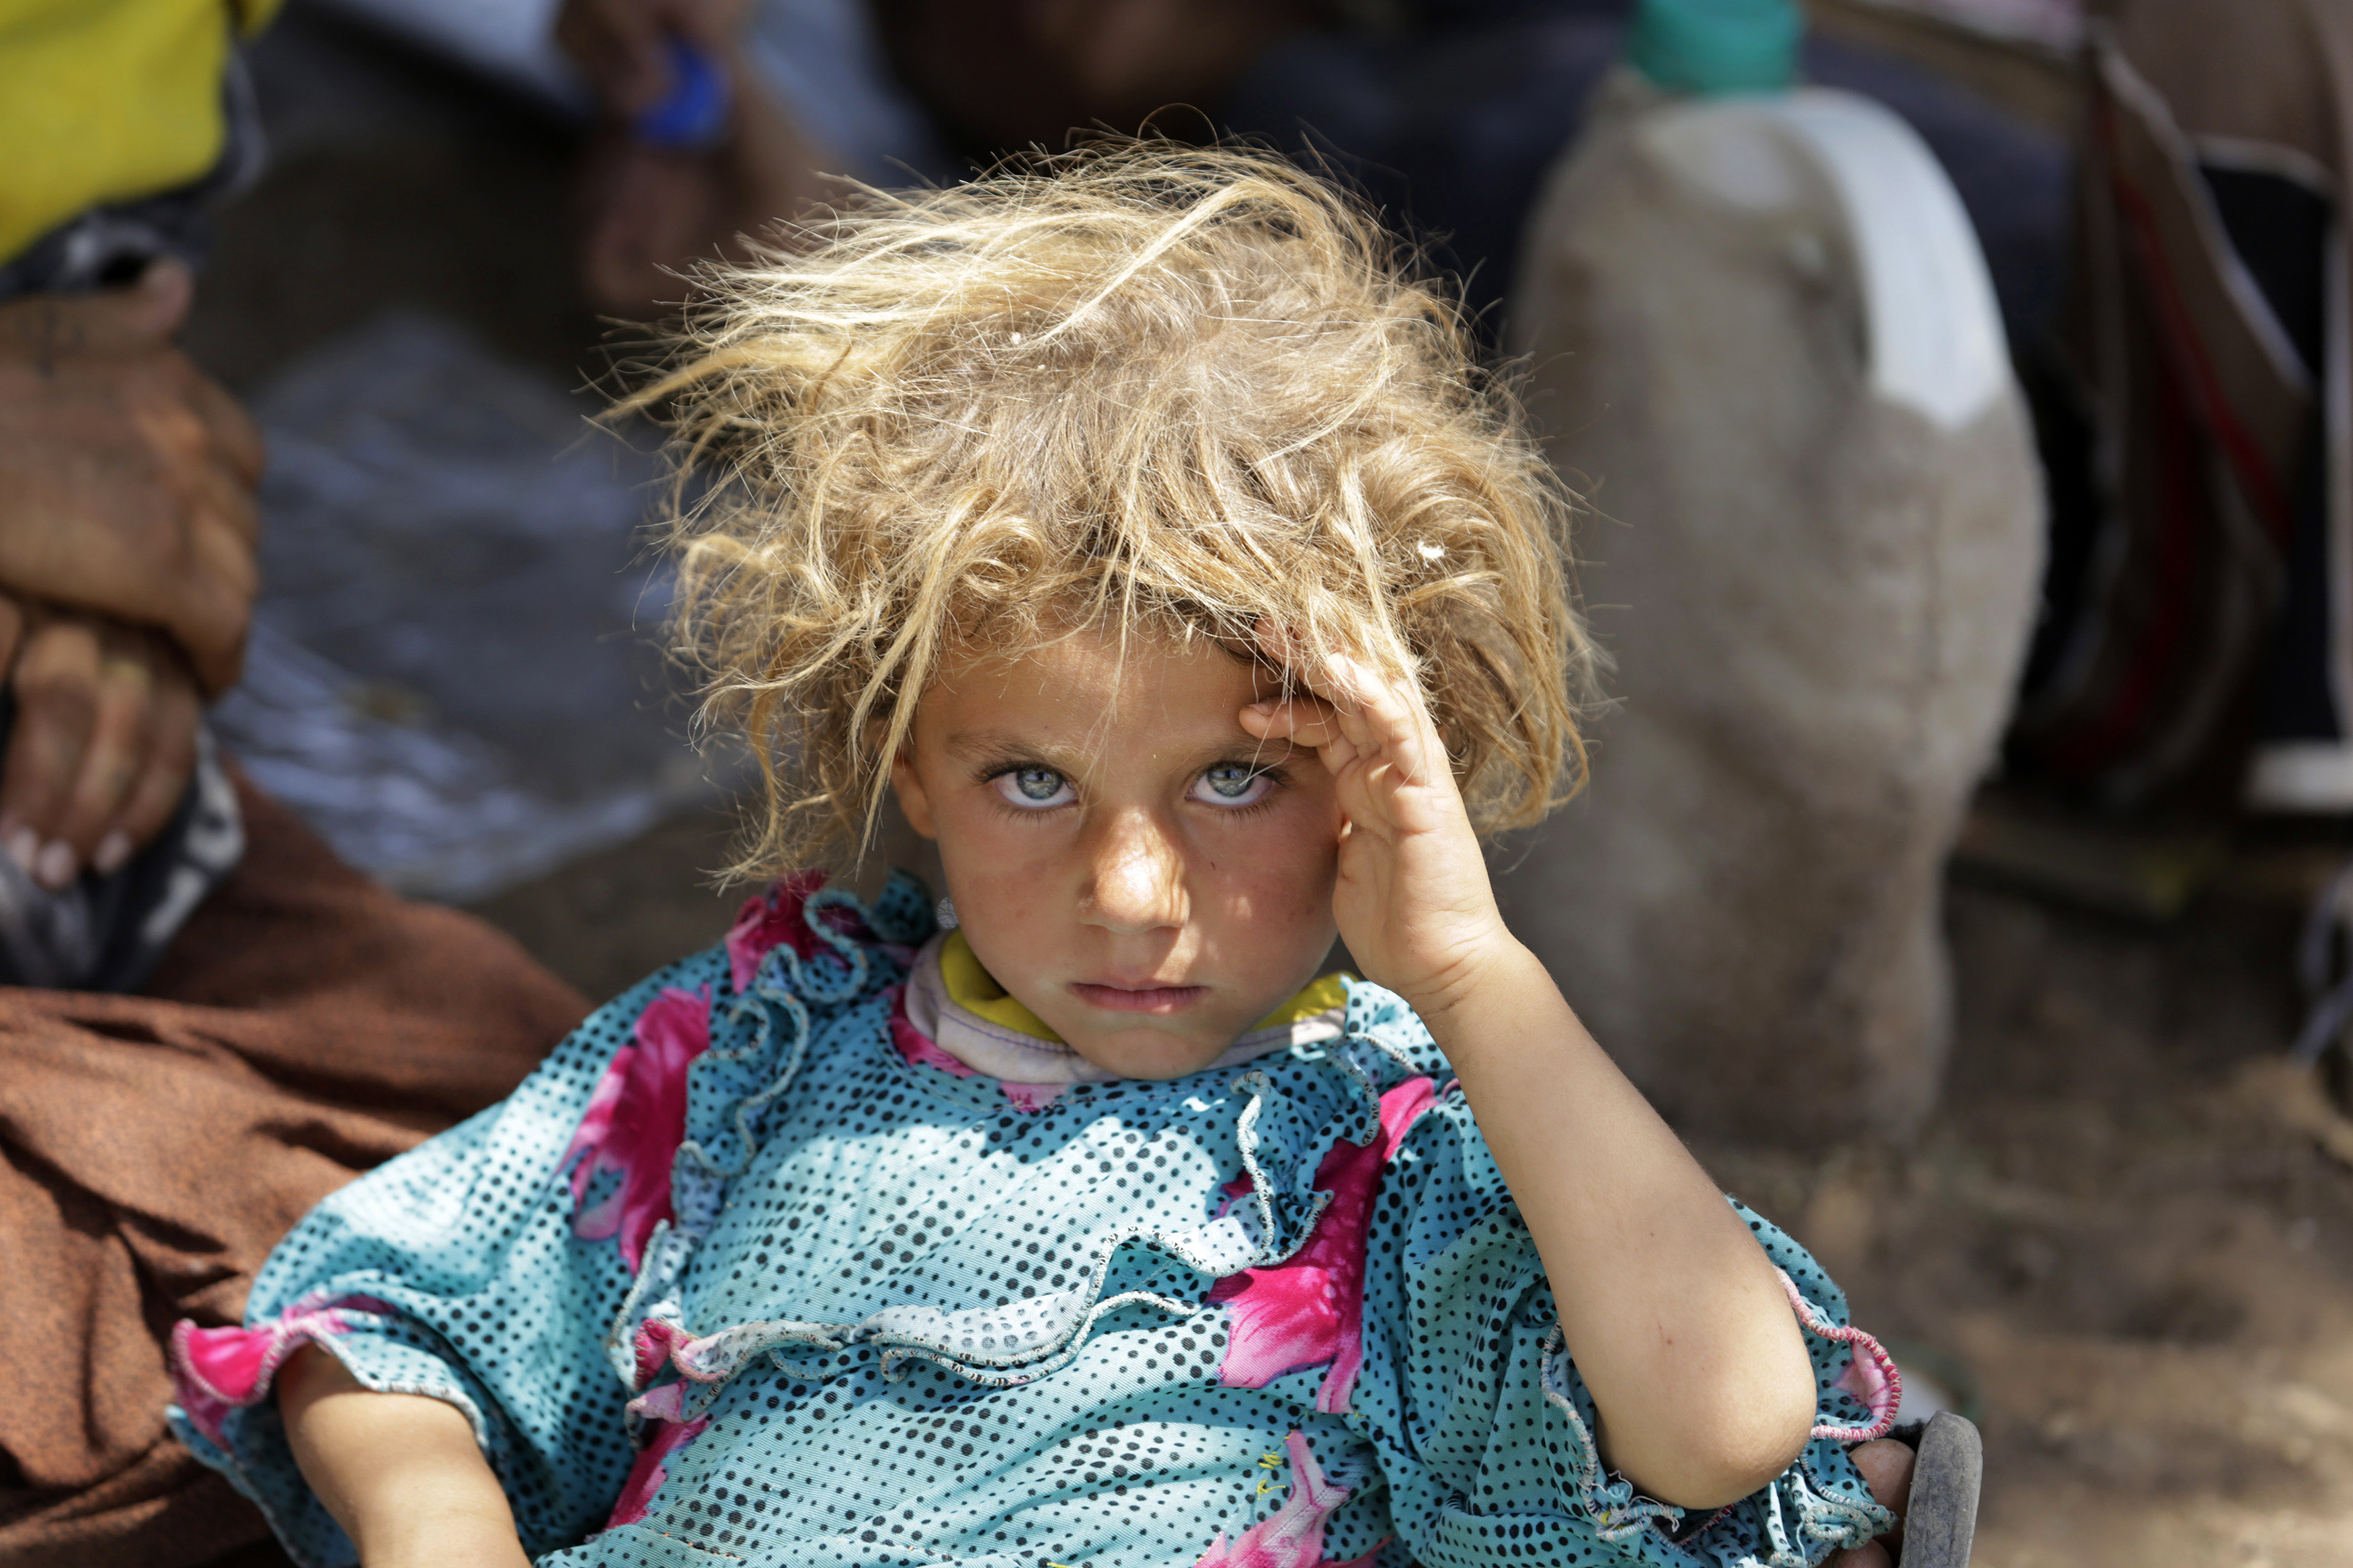 A girl from the minority Yazidi sect, fleeing the violence in the Iraqi town of Sinjar, rests at the Iraqi-Syrian border crossing in Fishkhabour, Dohuk province on August 13, 2014. (Youssef Boudlal—REUTERS)